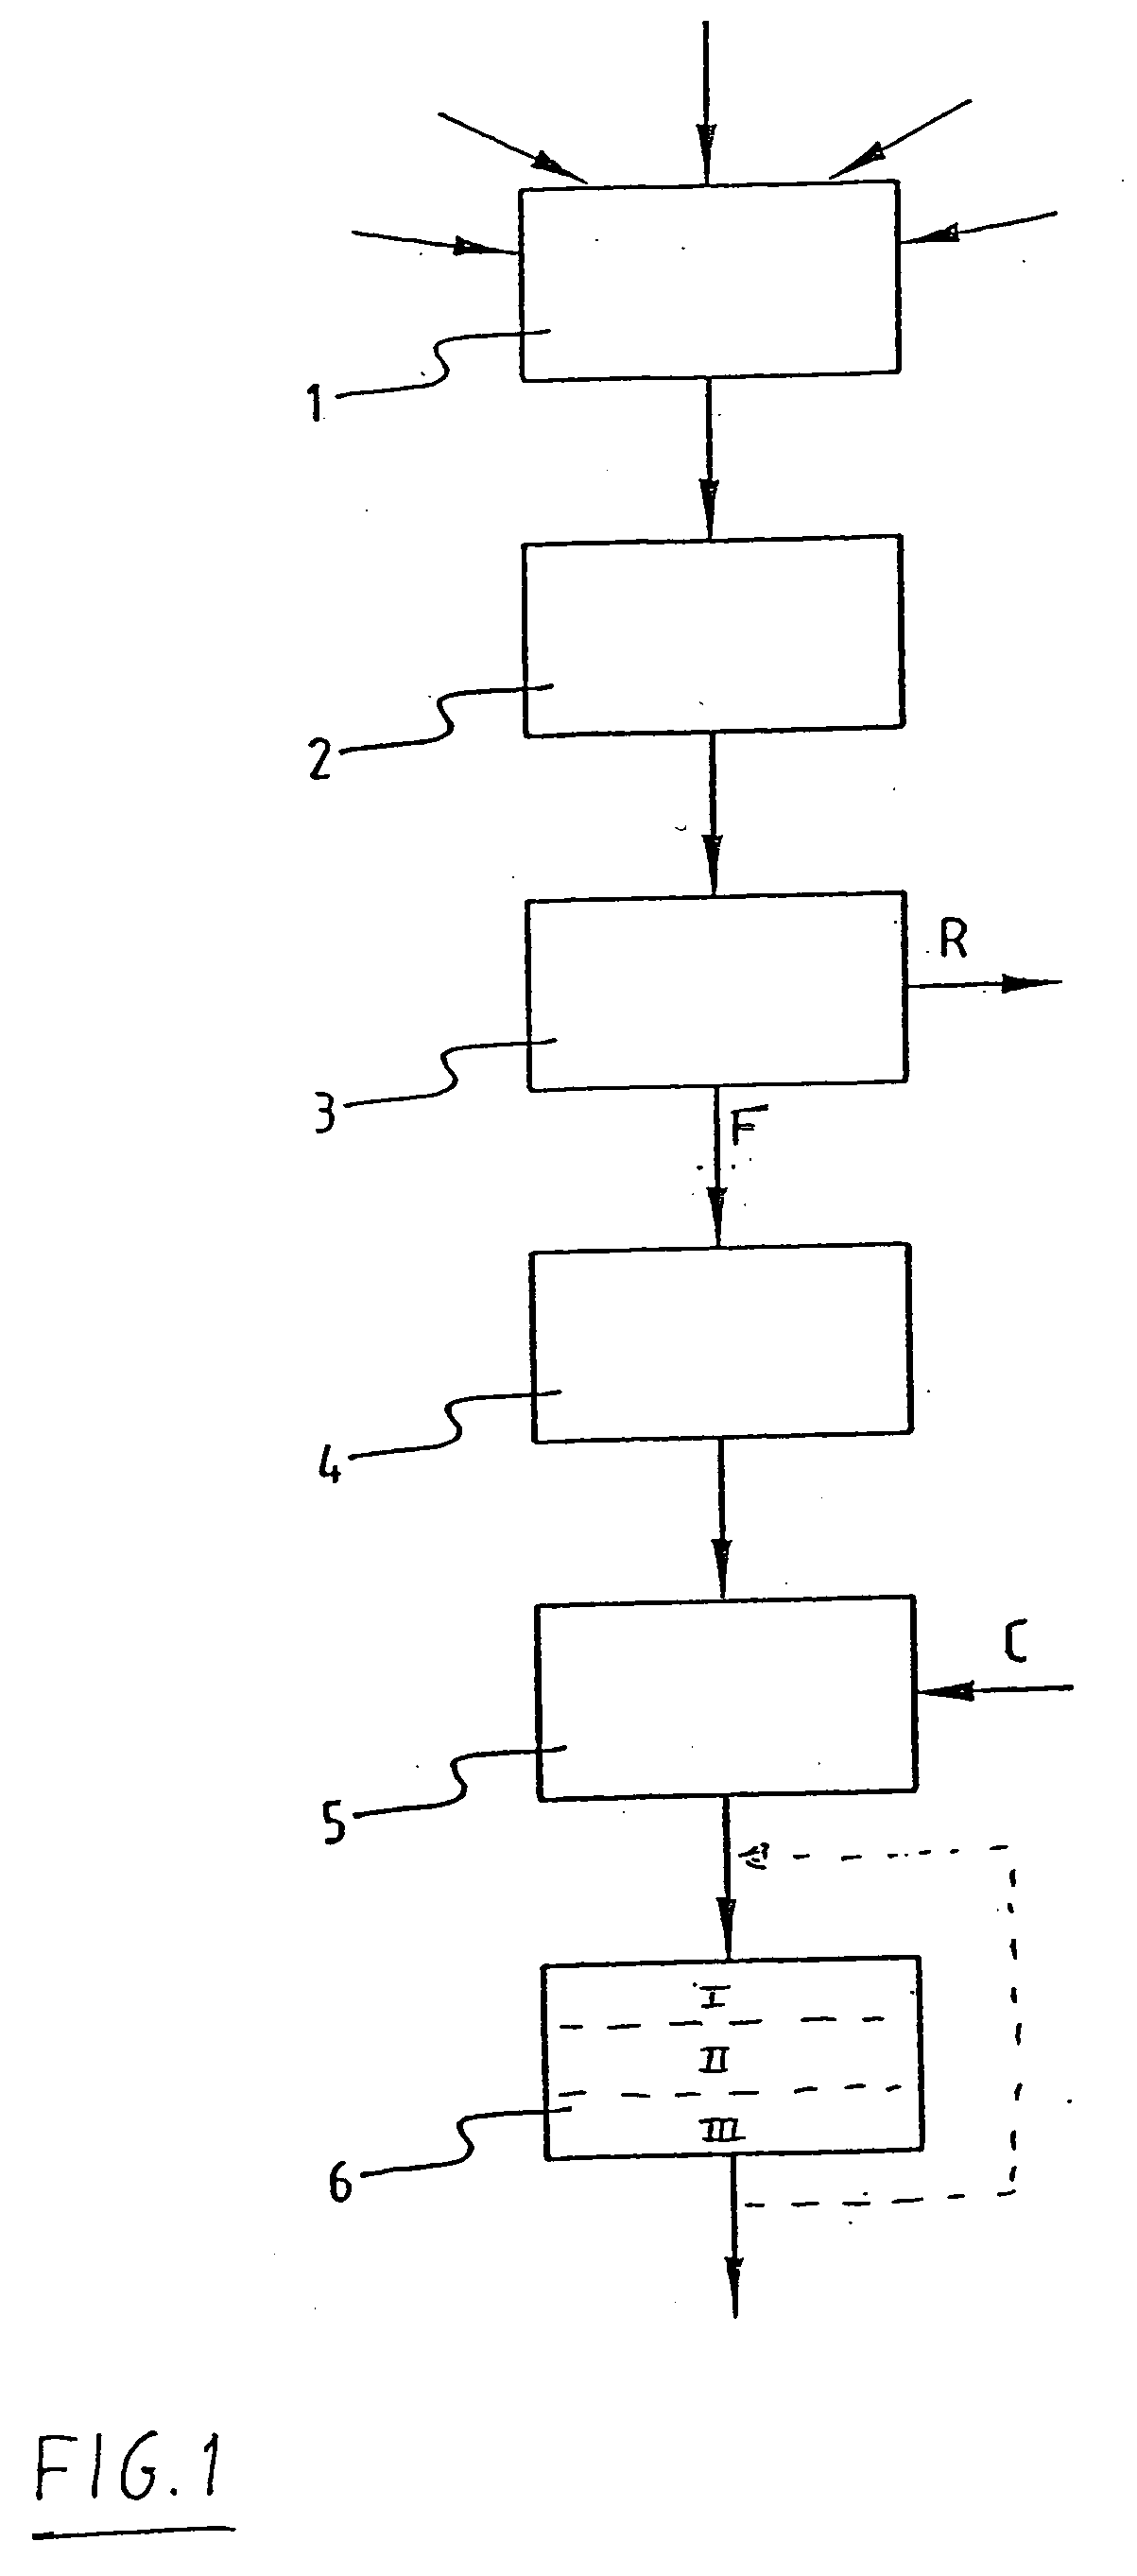 Method and installation for conversion into fuel of organic material originating for instance from domestic waste